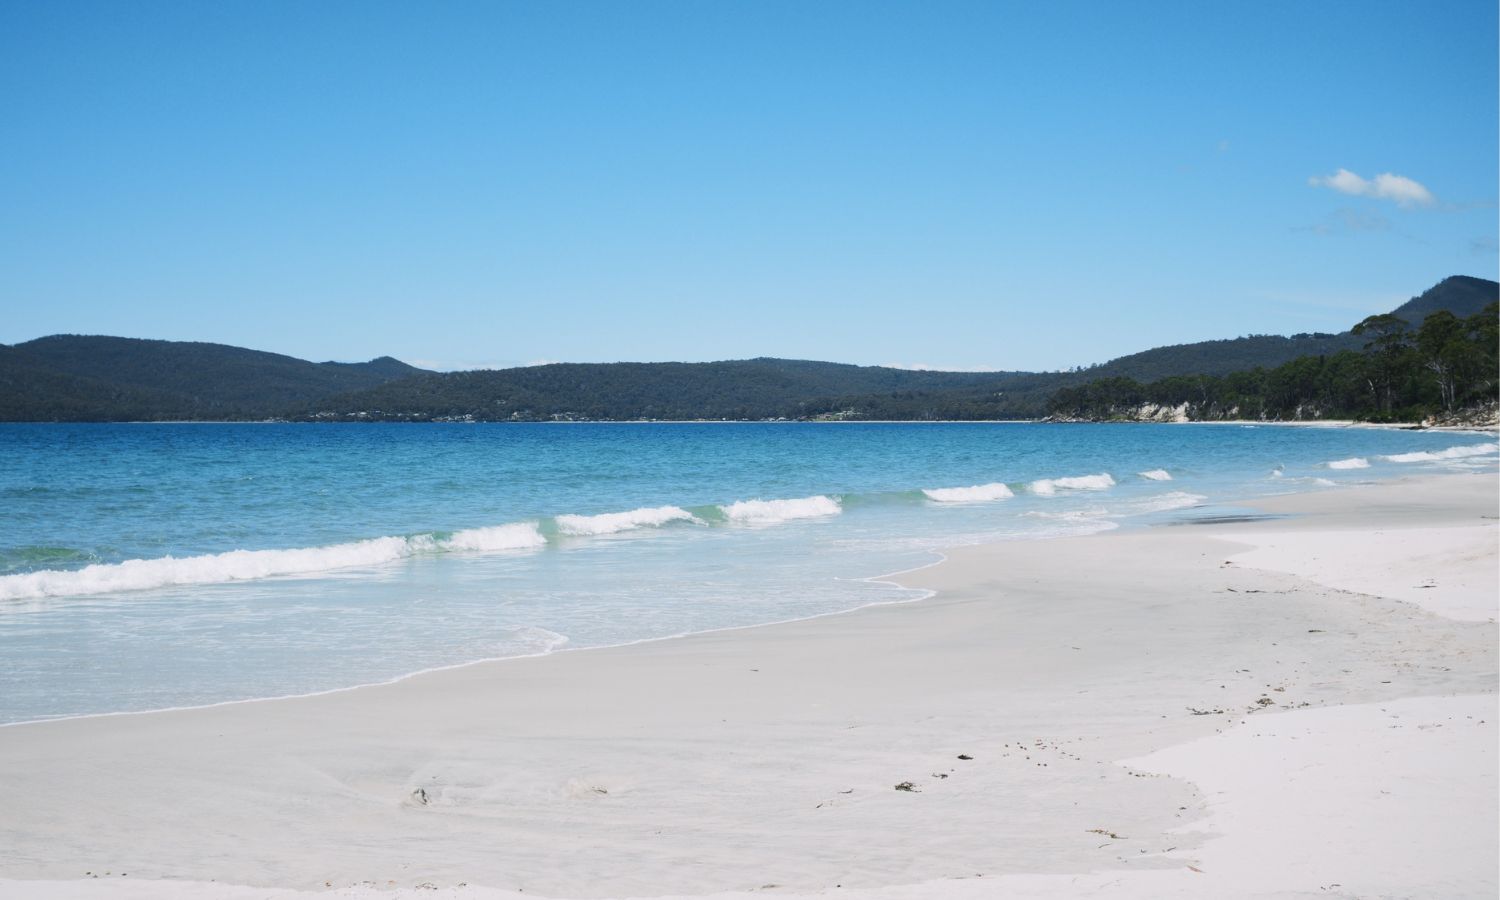 An image of one of the best beaches in tasmania